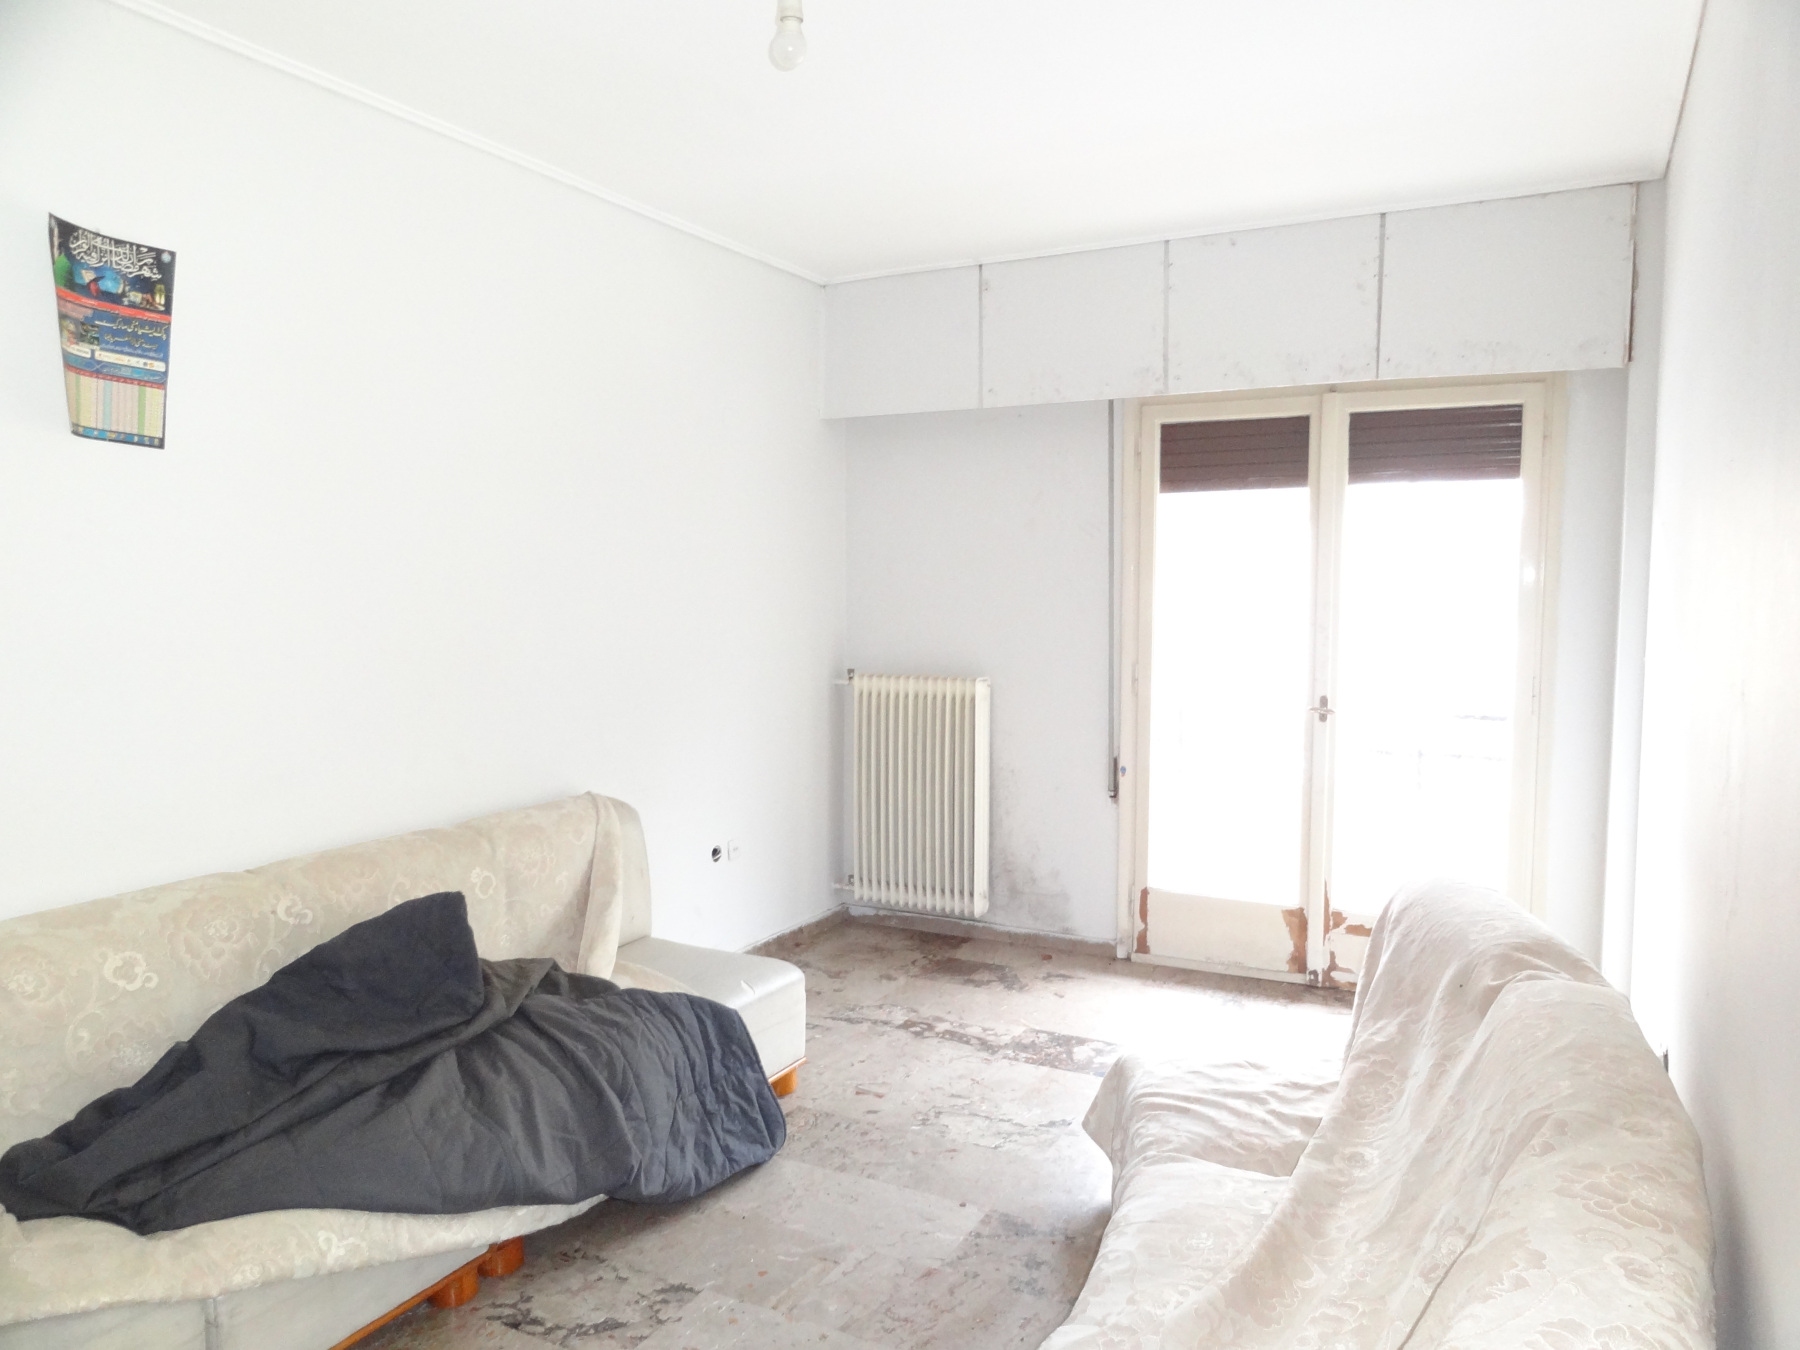 For sale 2 bedrooms apartment of 80 sq.m. 2nd floor in the area of Agioi Apostoloi in Ampelokipi in Ioannina